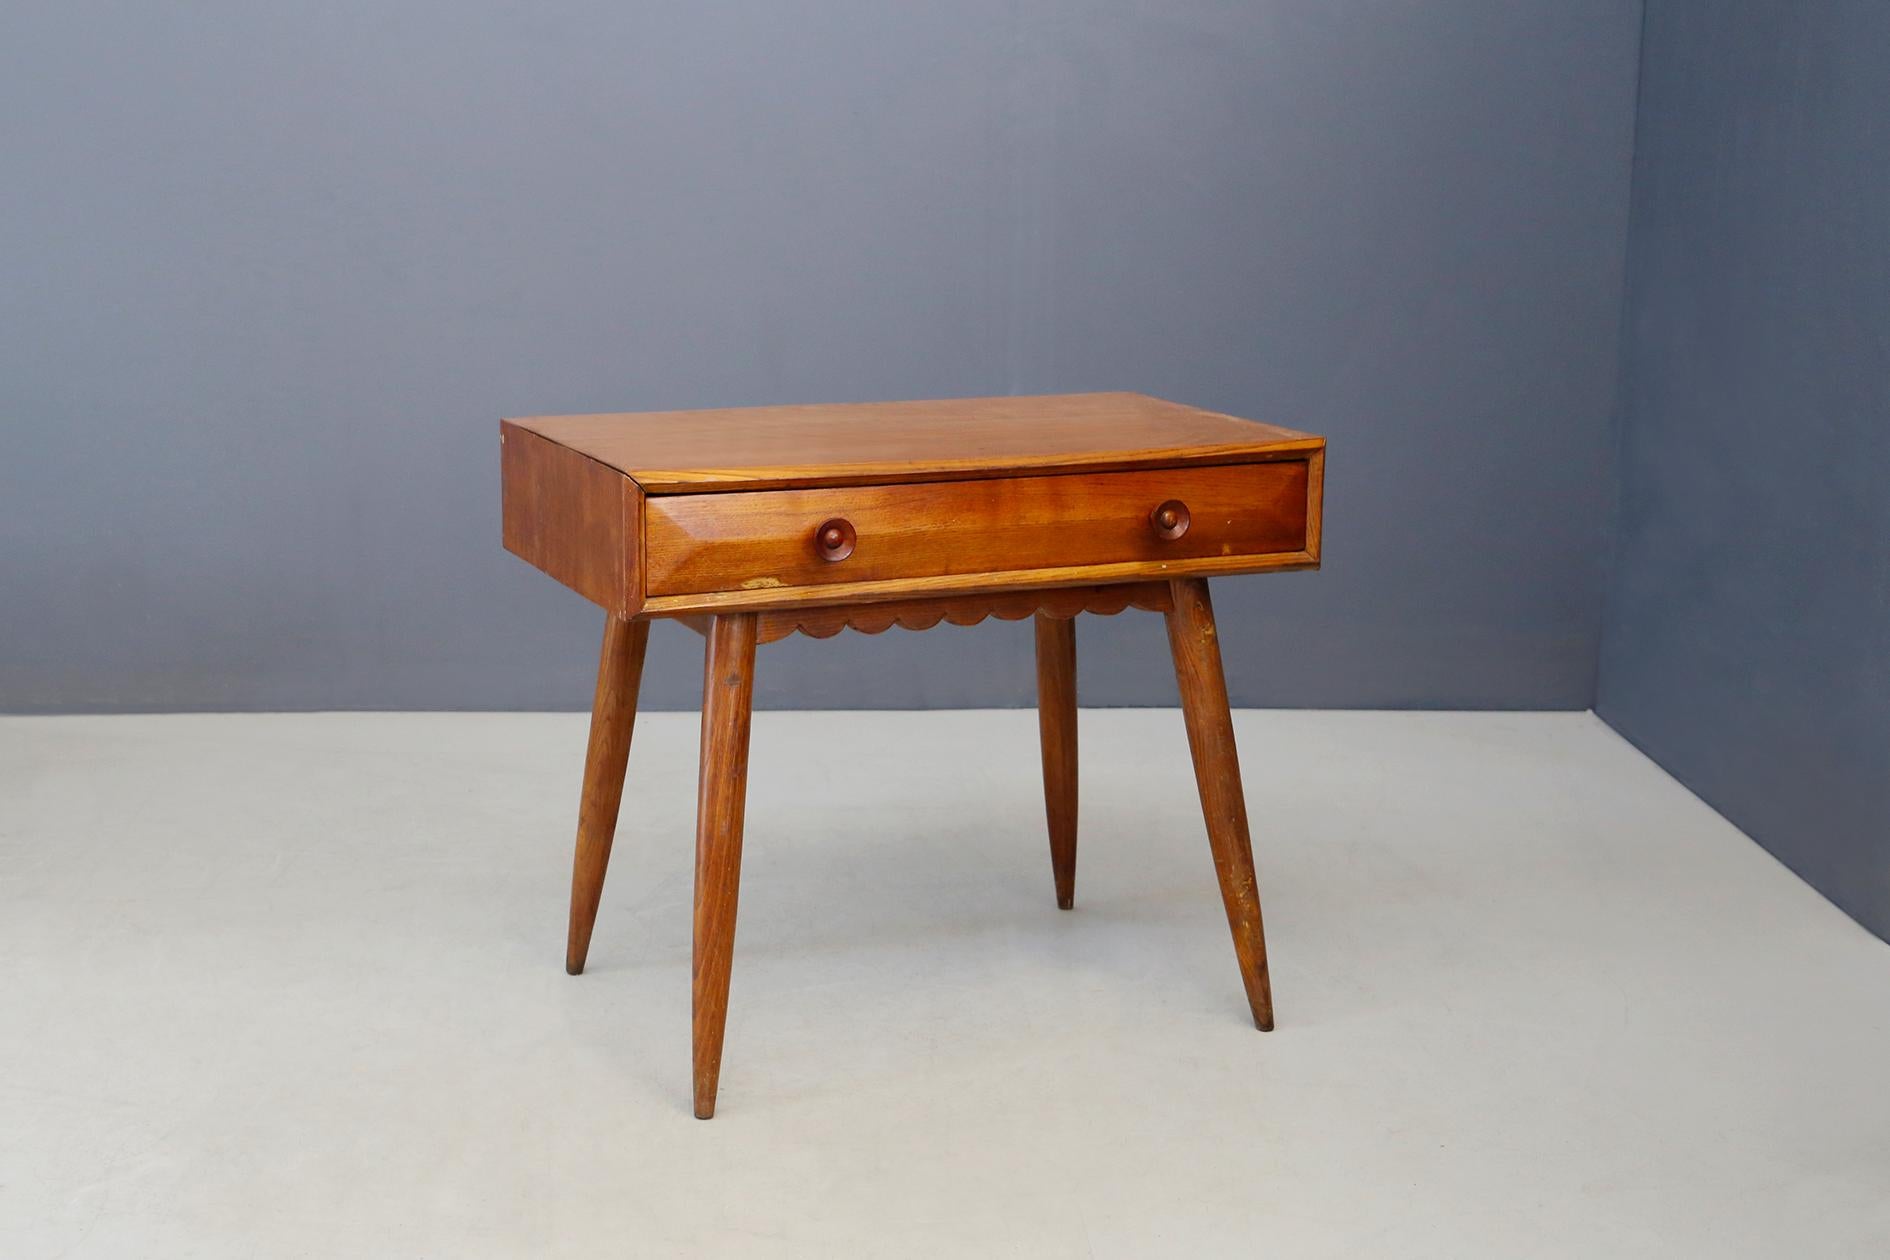 Paolo Buffa midcentury desk with drawer in oak with flounce, 1950s. The desk is made of oak wood with pull-out drawer. The drawer is pull-out with two inlaid wood knobs.
The peculiarity of the desk is its flounce under the drawer typical of the